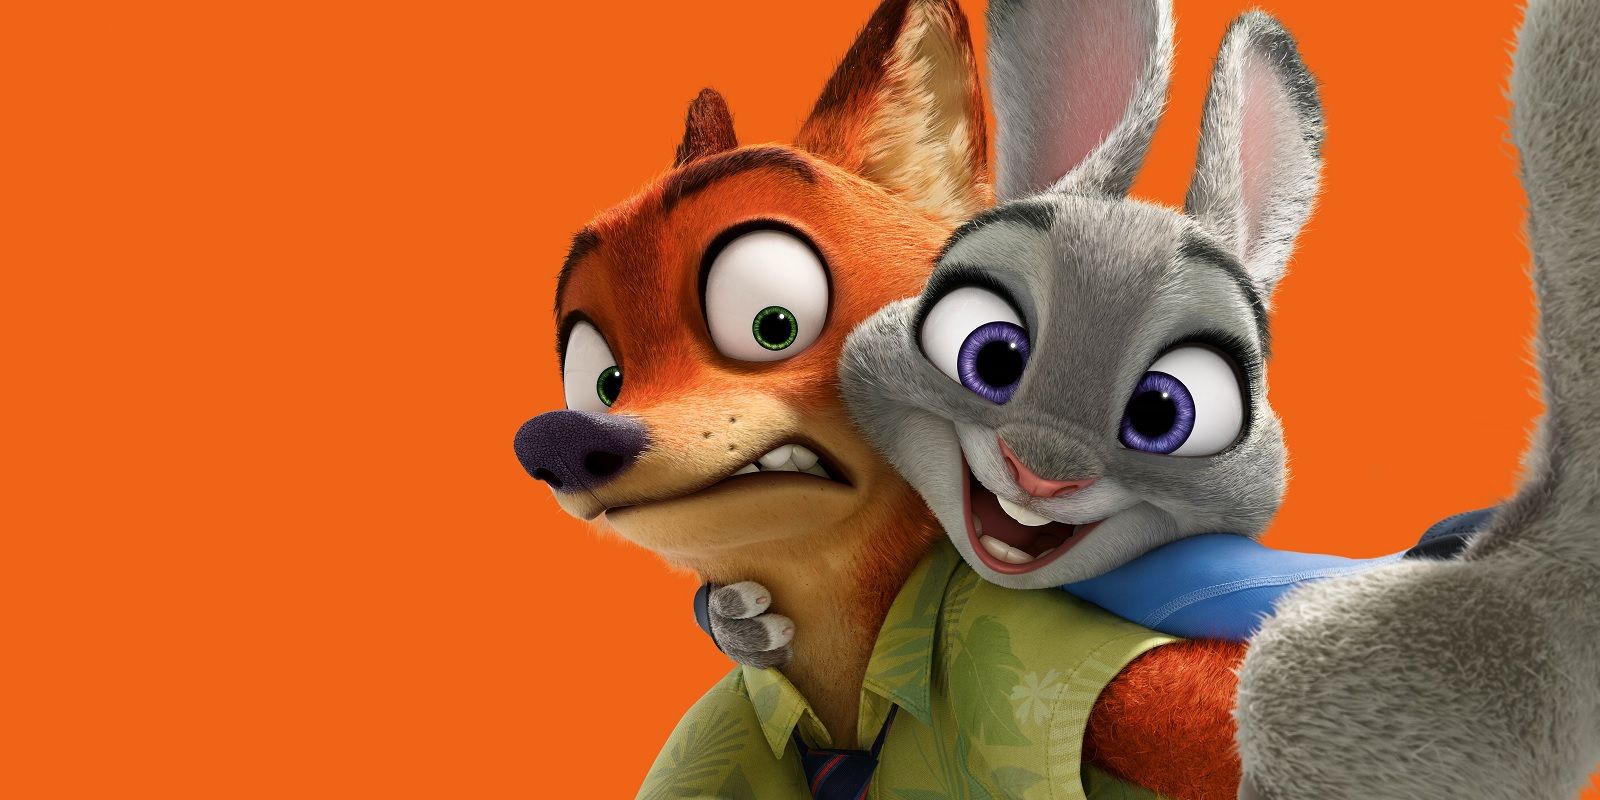 Nick and Judy taking a selfie against an orange background in Zootopia.